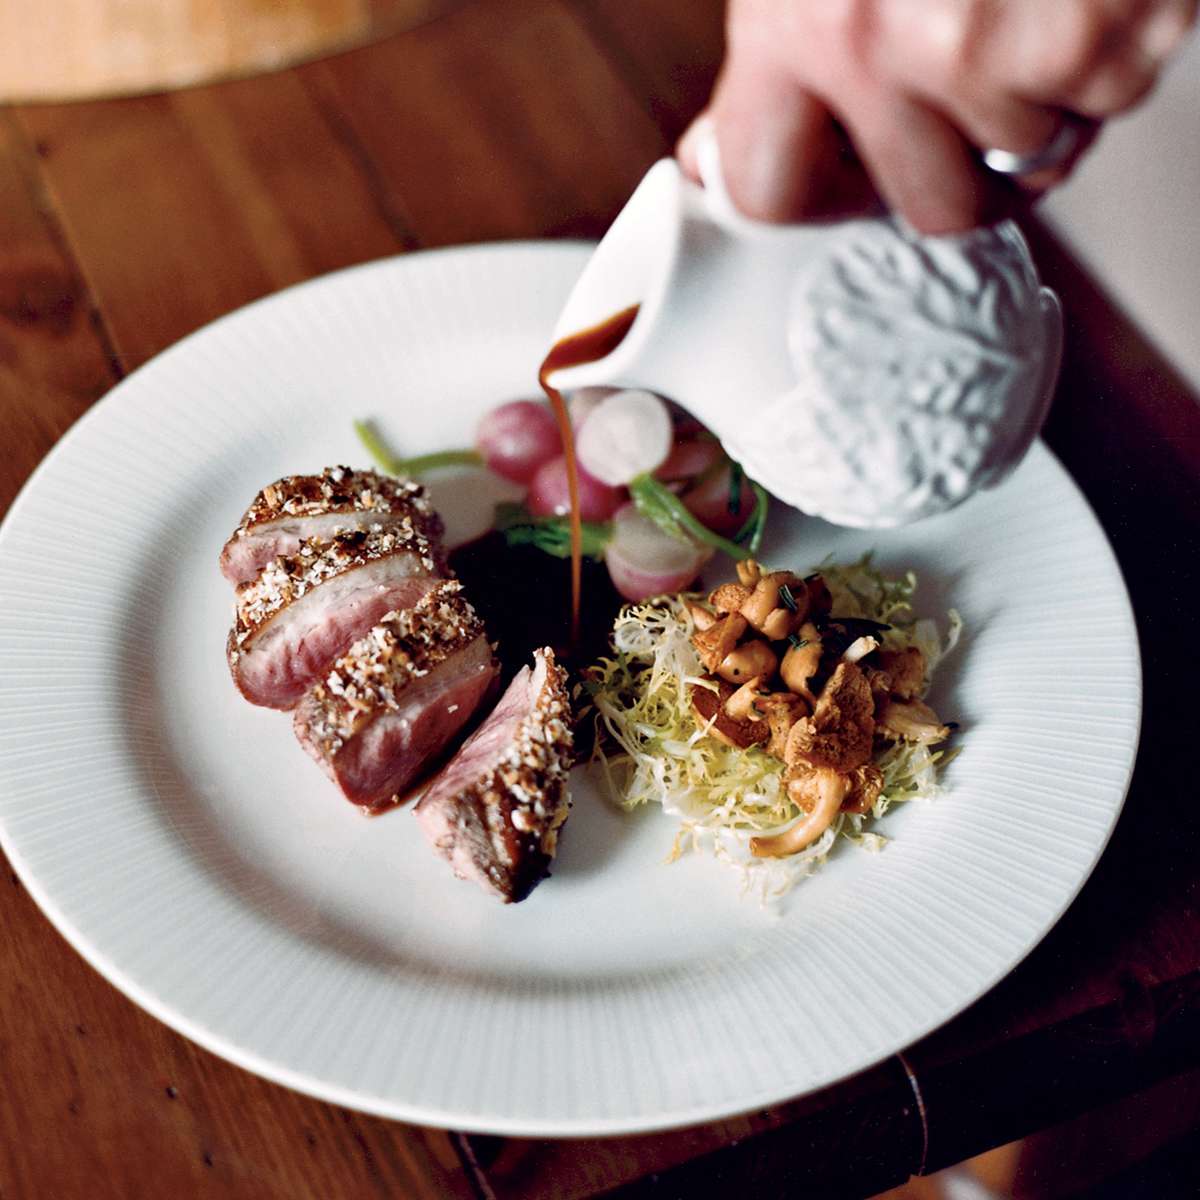 Crunchy Almond-Crusted Duck Breasts with Chanterelle Salad 